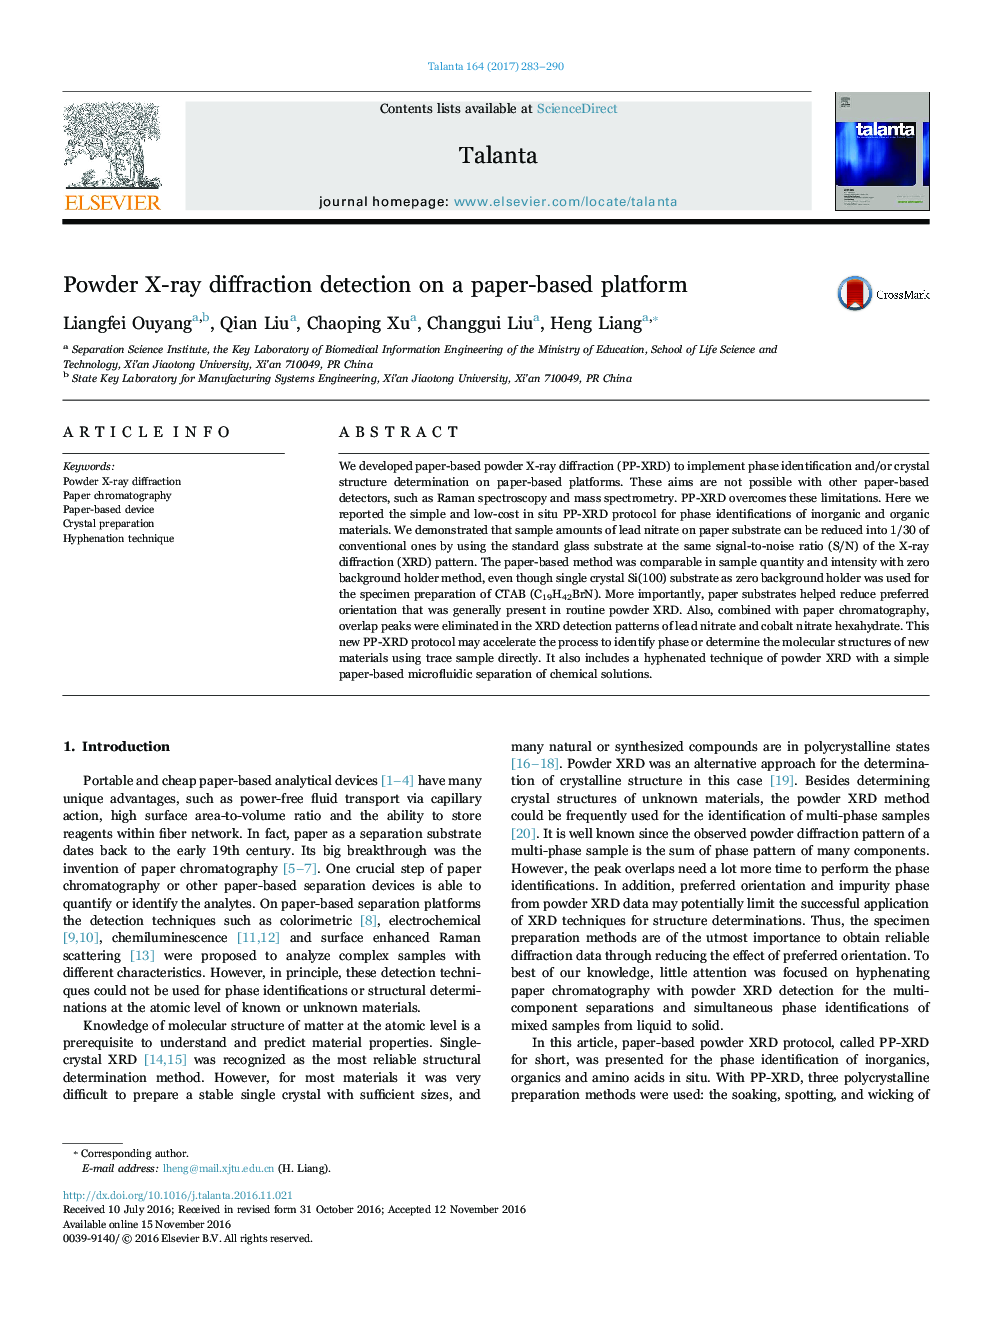 Powder X-ray diffraction detection on a paper-based platform